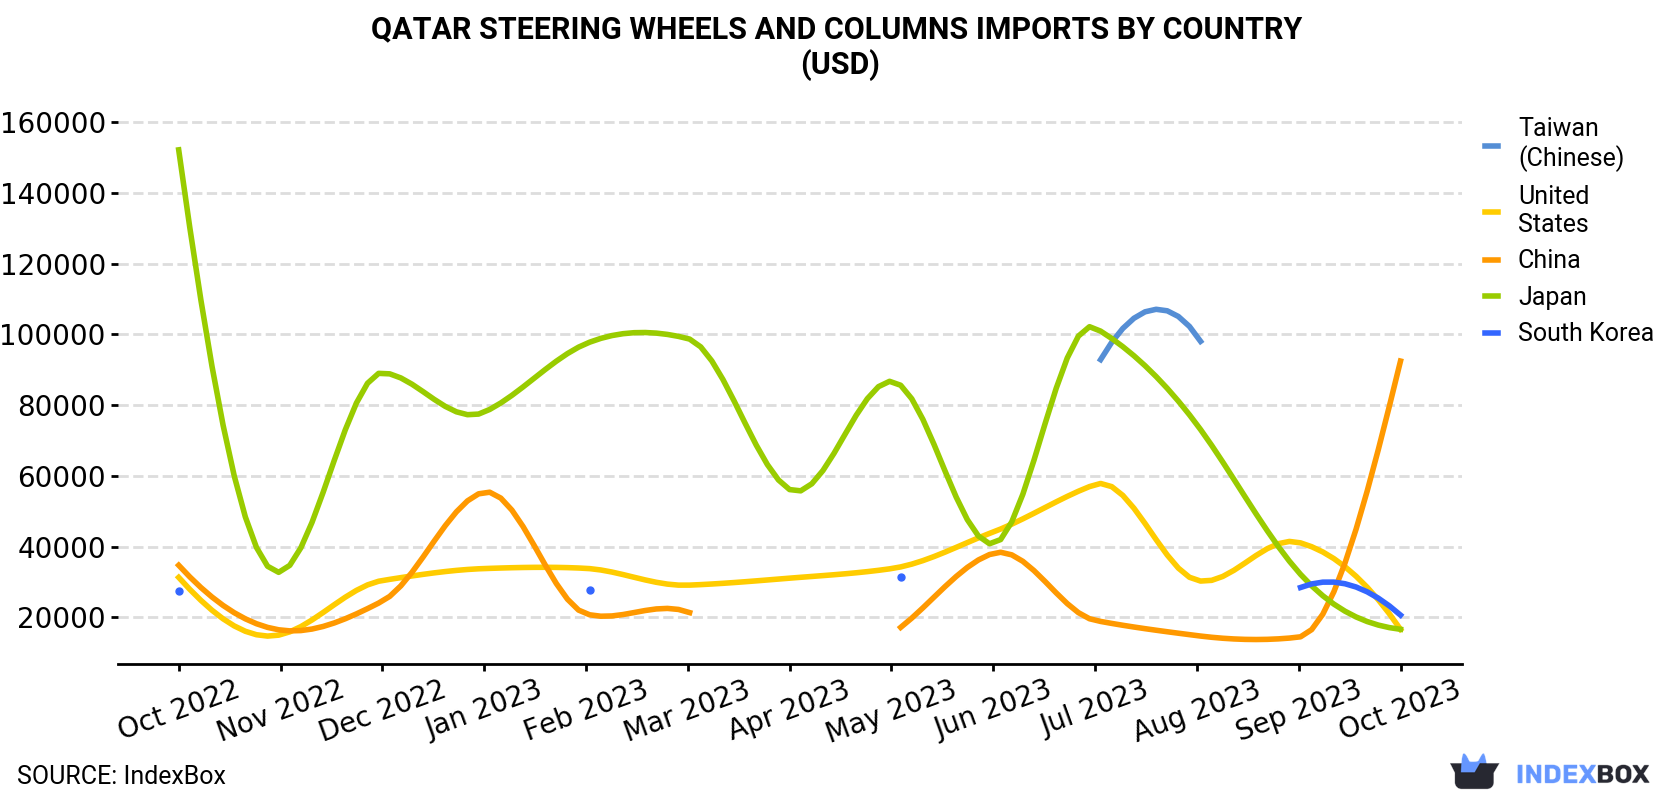 Qatar Steering Wheels And Columns Imports By Country (USD)